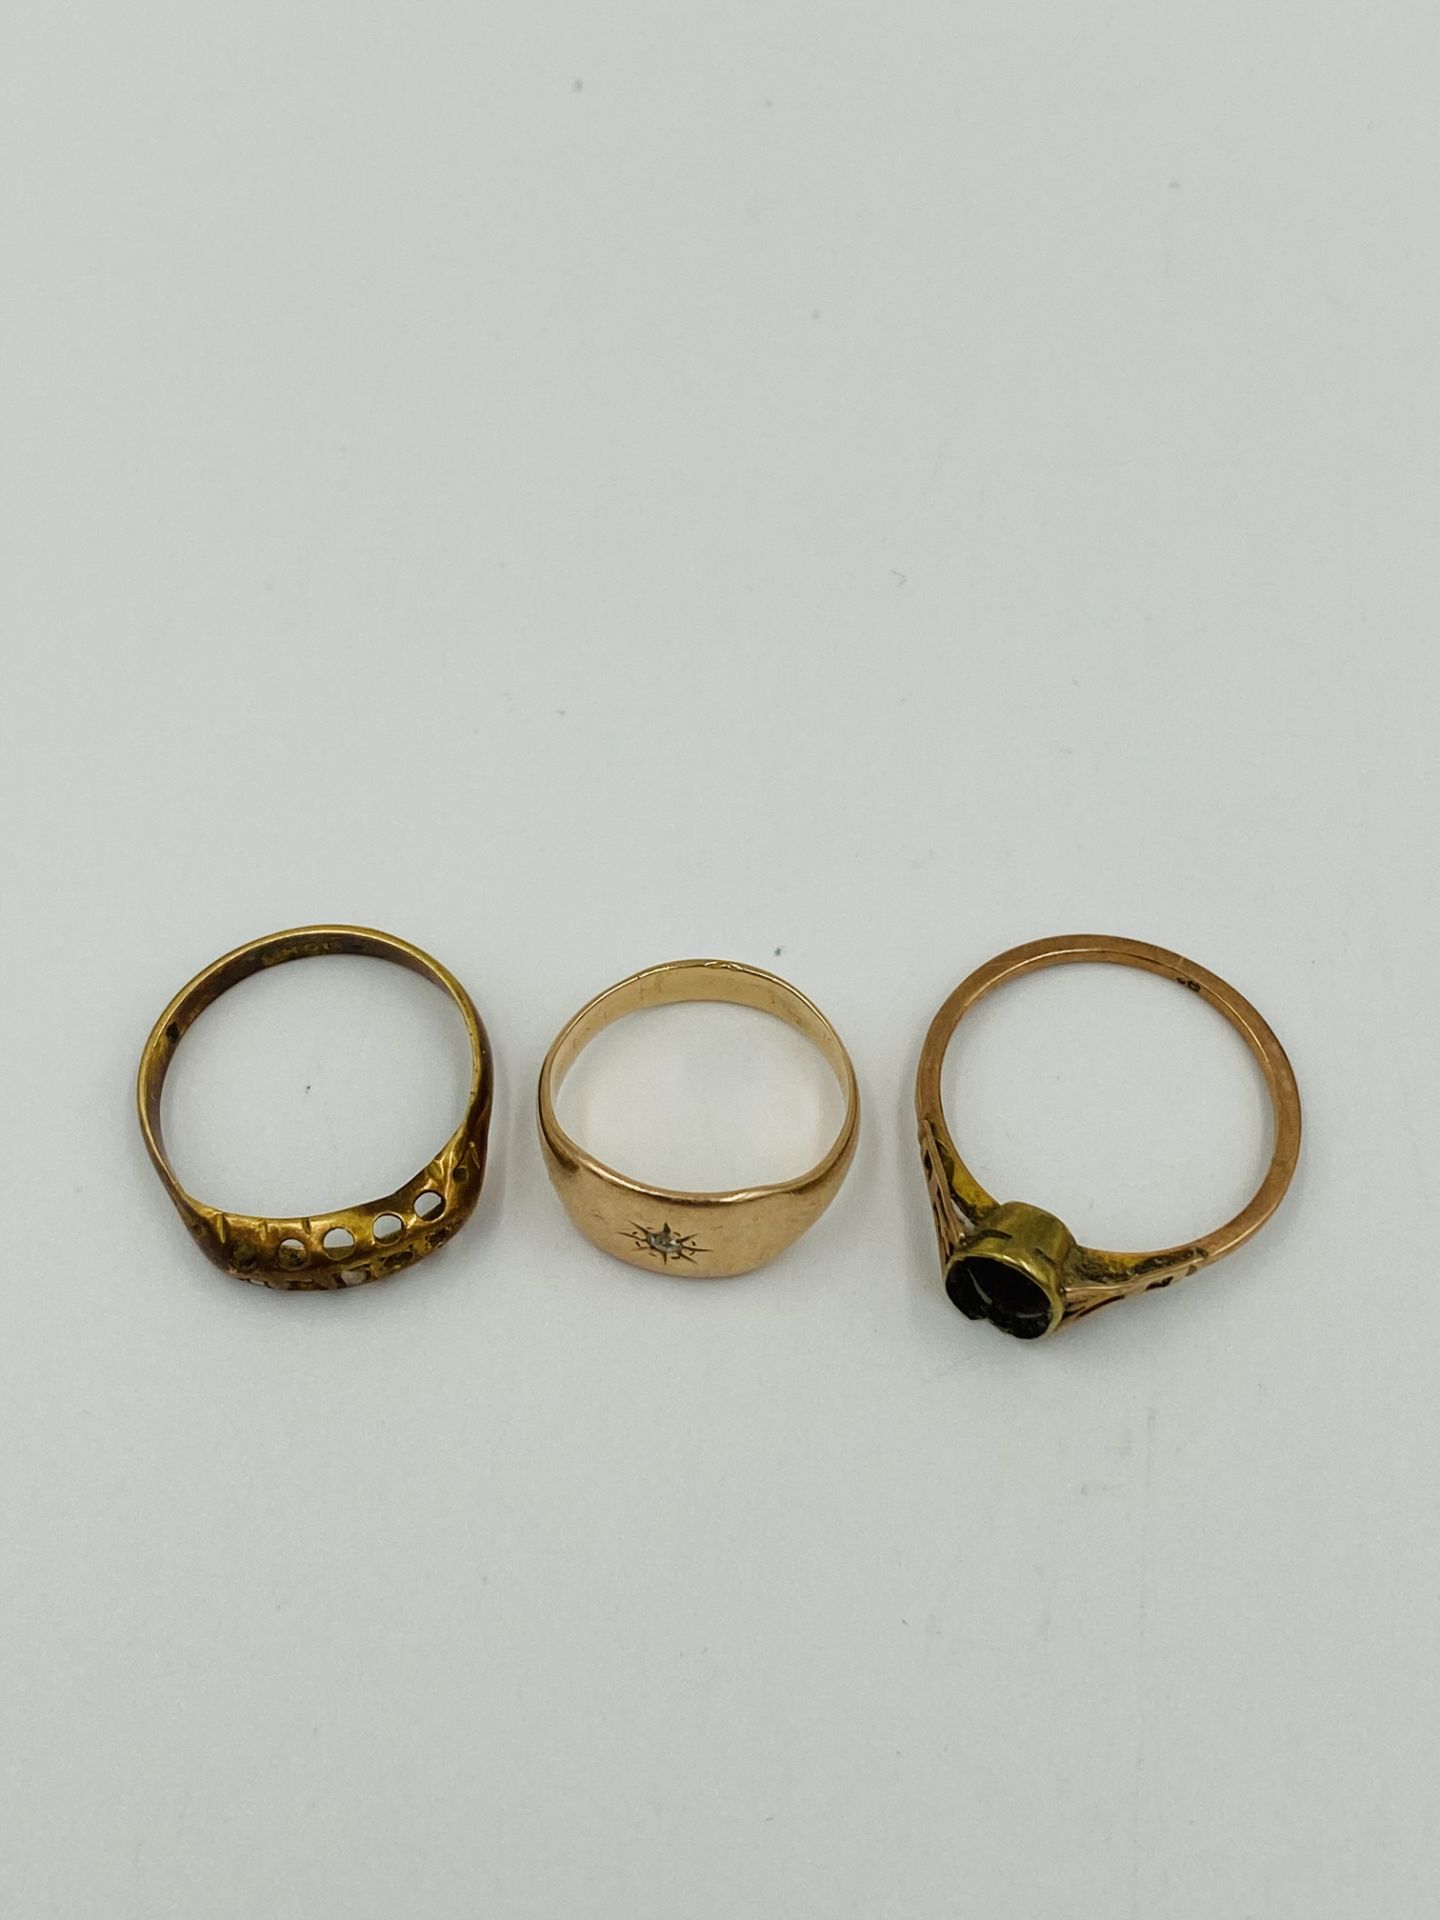 Two gold rings together with a yellow metal ring - Bild 2 aus 3